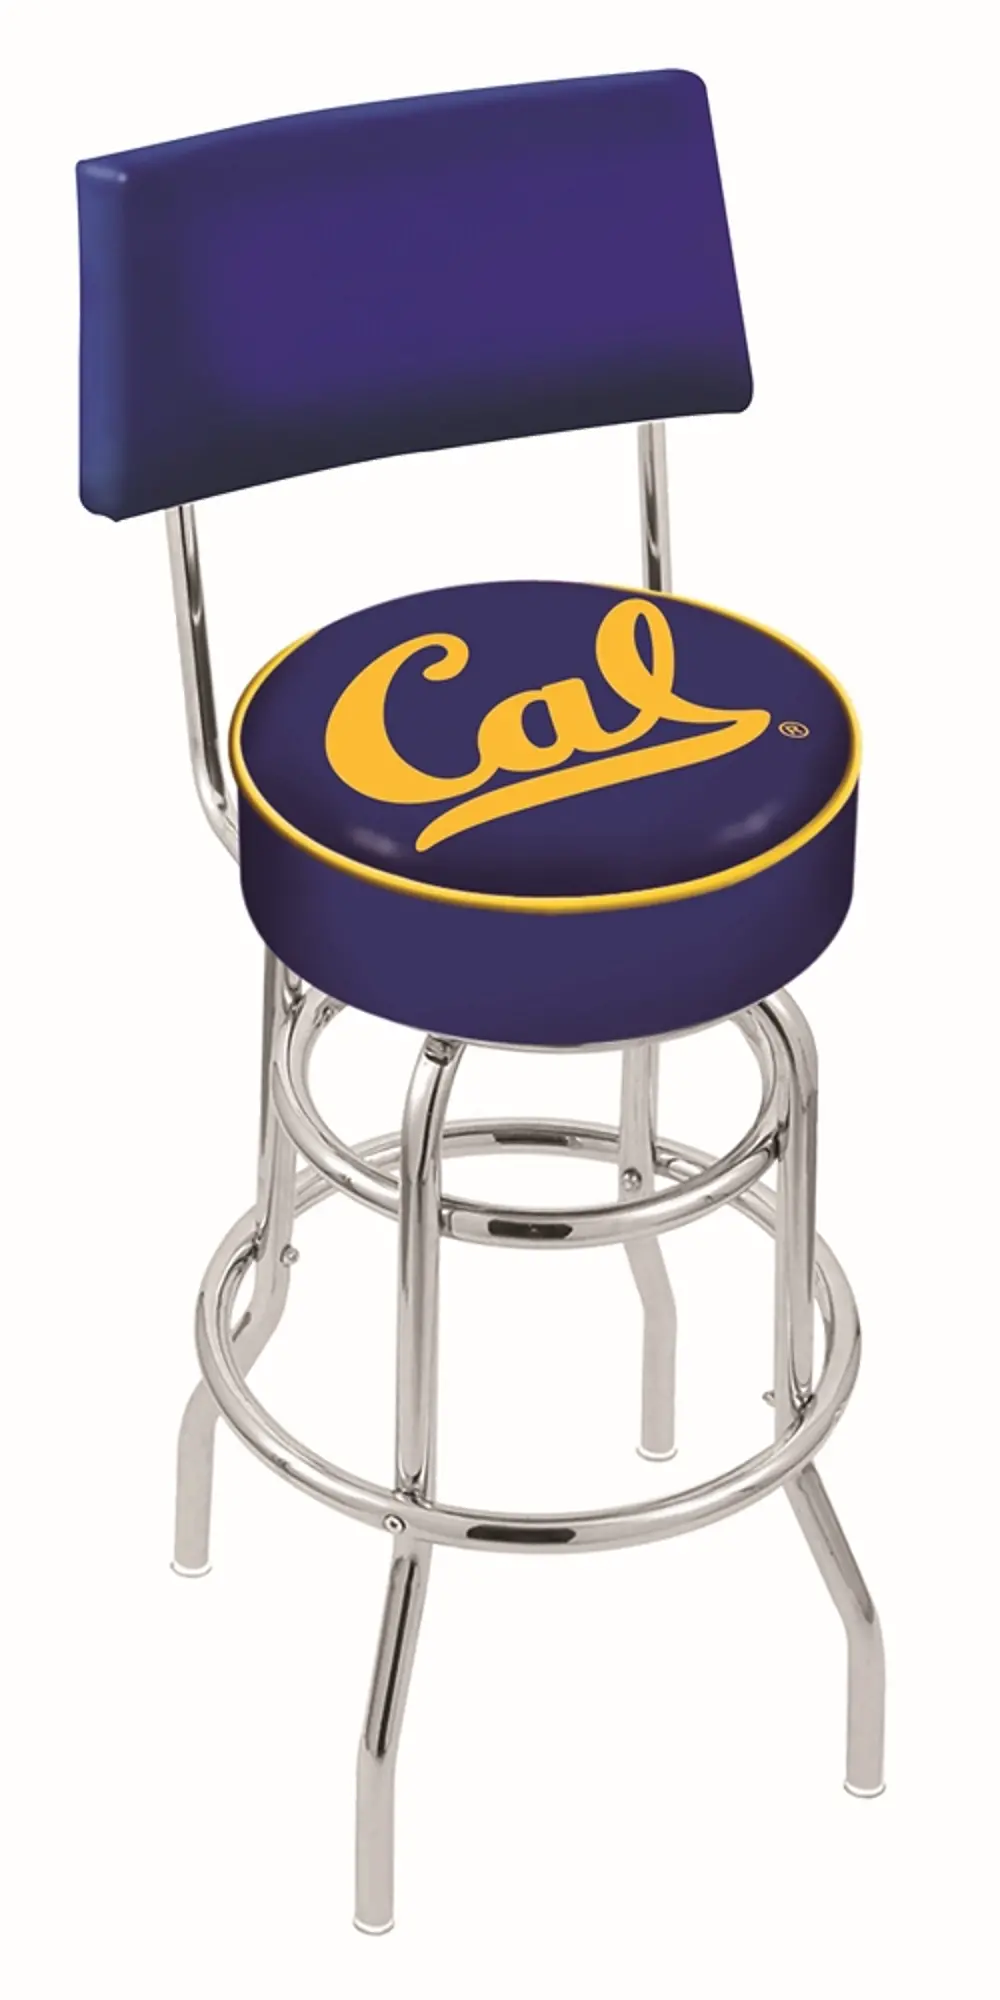 Chrome Swivel Counter Height Stool with Back Rest - Cal U-1